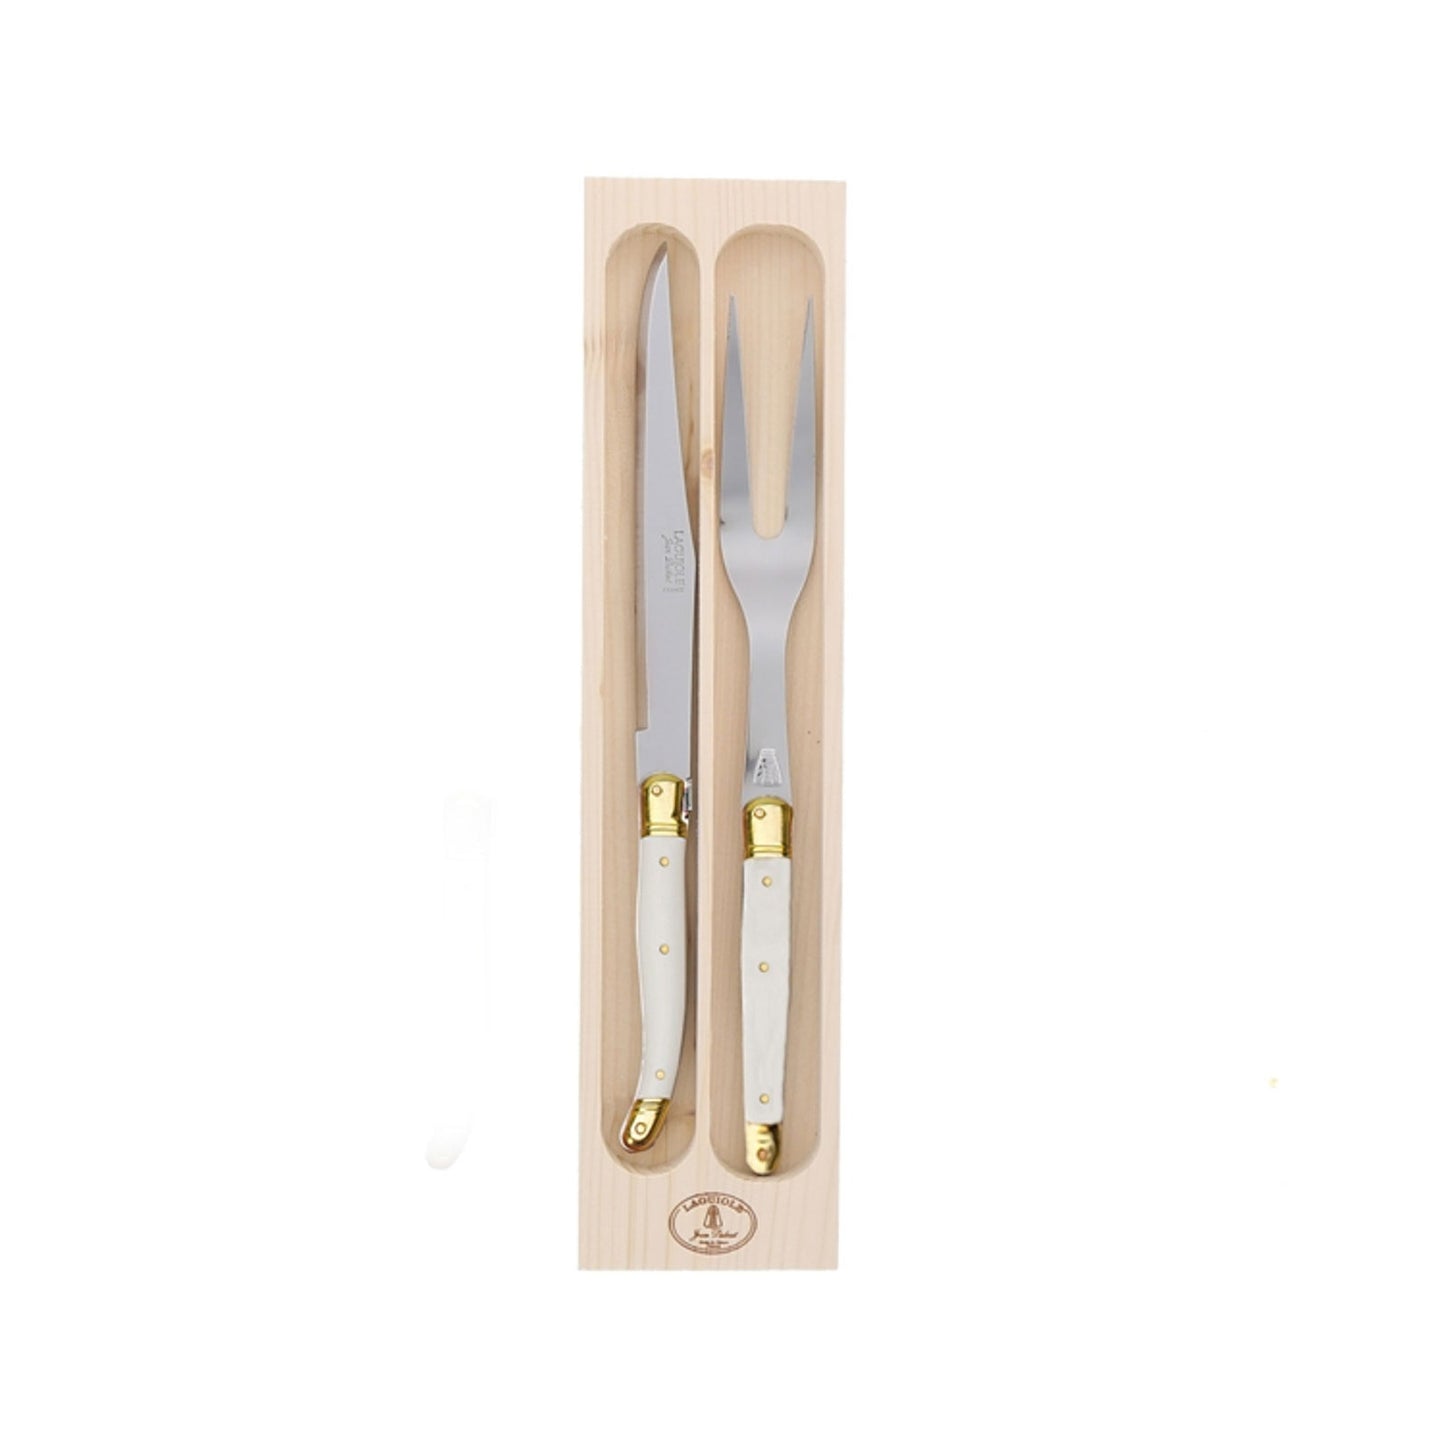 Jean Dubost Carving Set with Ivory handles in Box